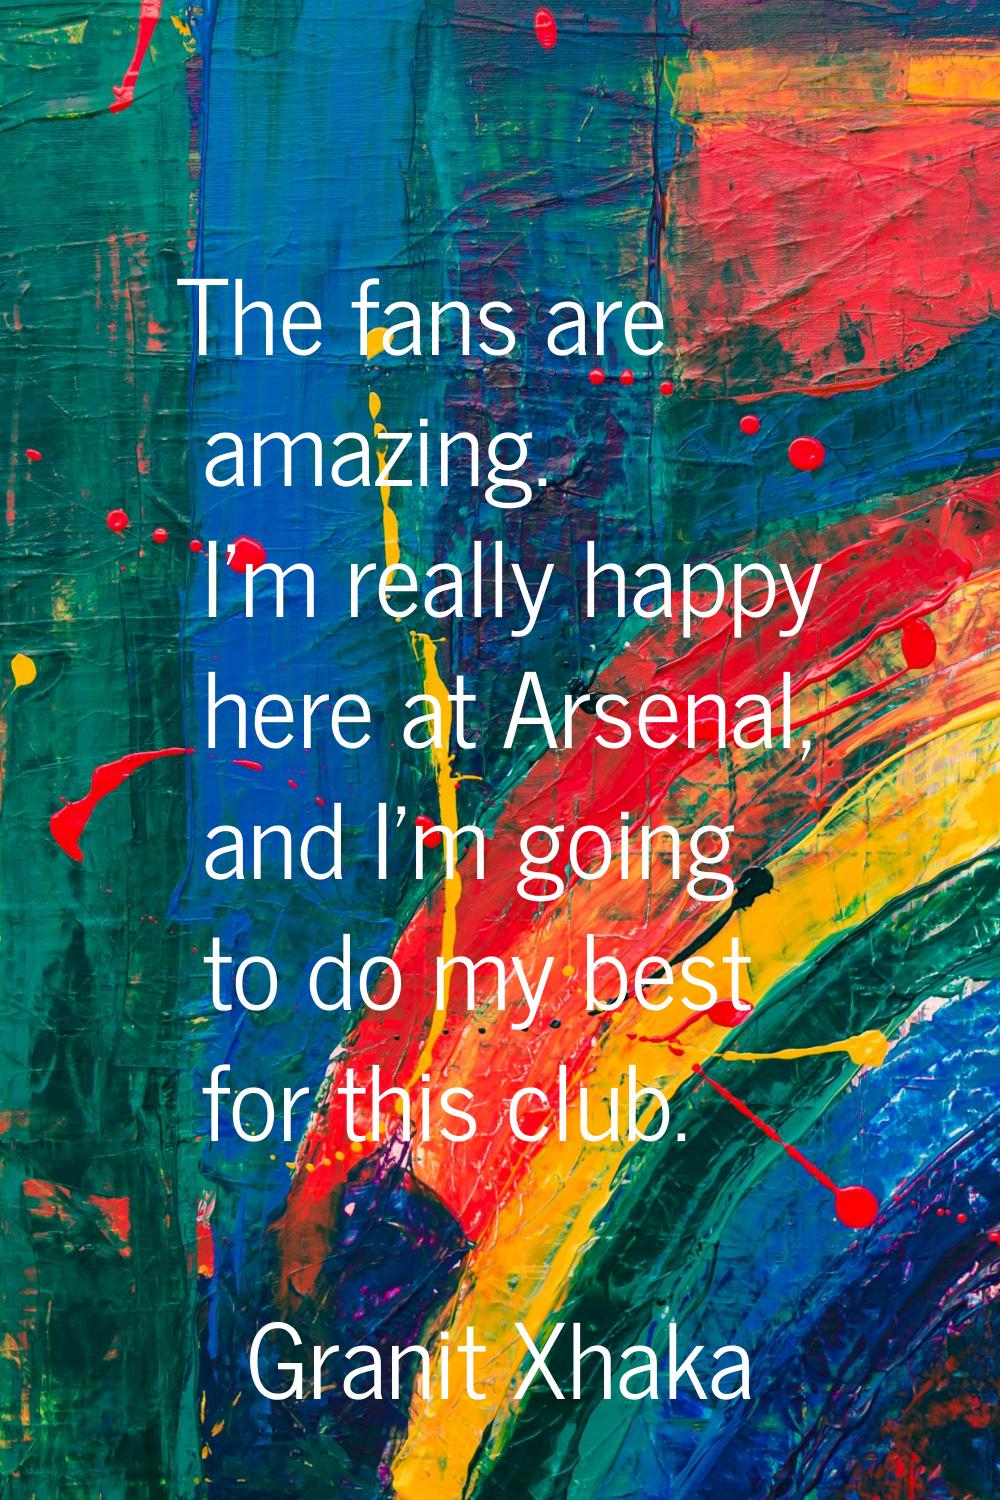 The fans are amazing. I'm really happy here at Arsenal, and I'm going to do my best for this club.